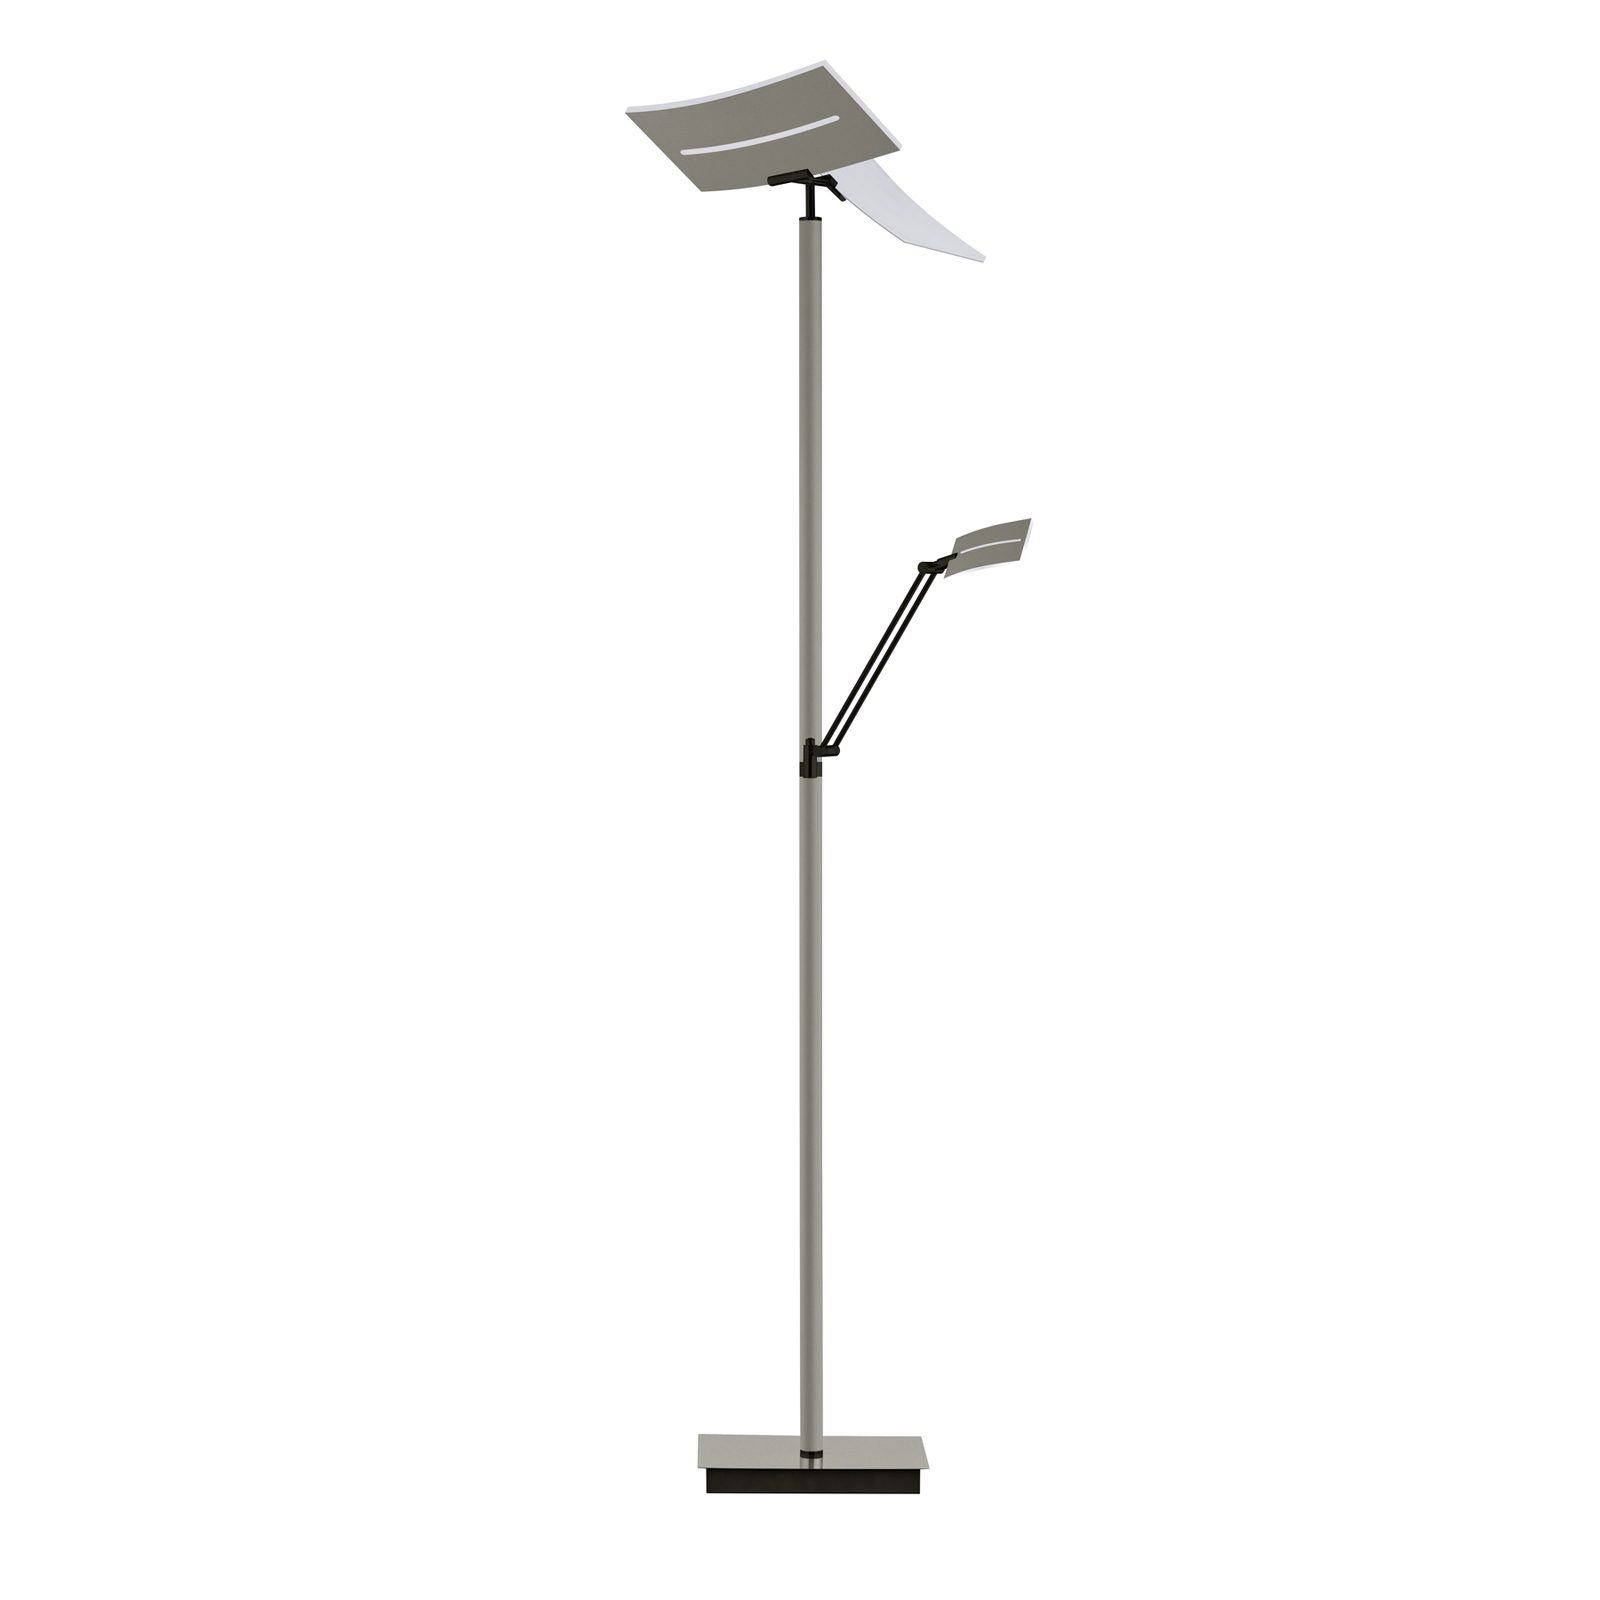 LED-gulvlampe Evolo CCT med leselampe, taupe